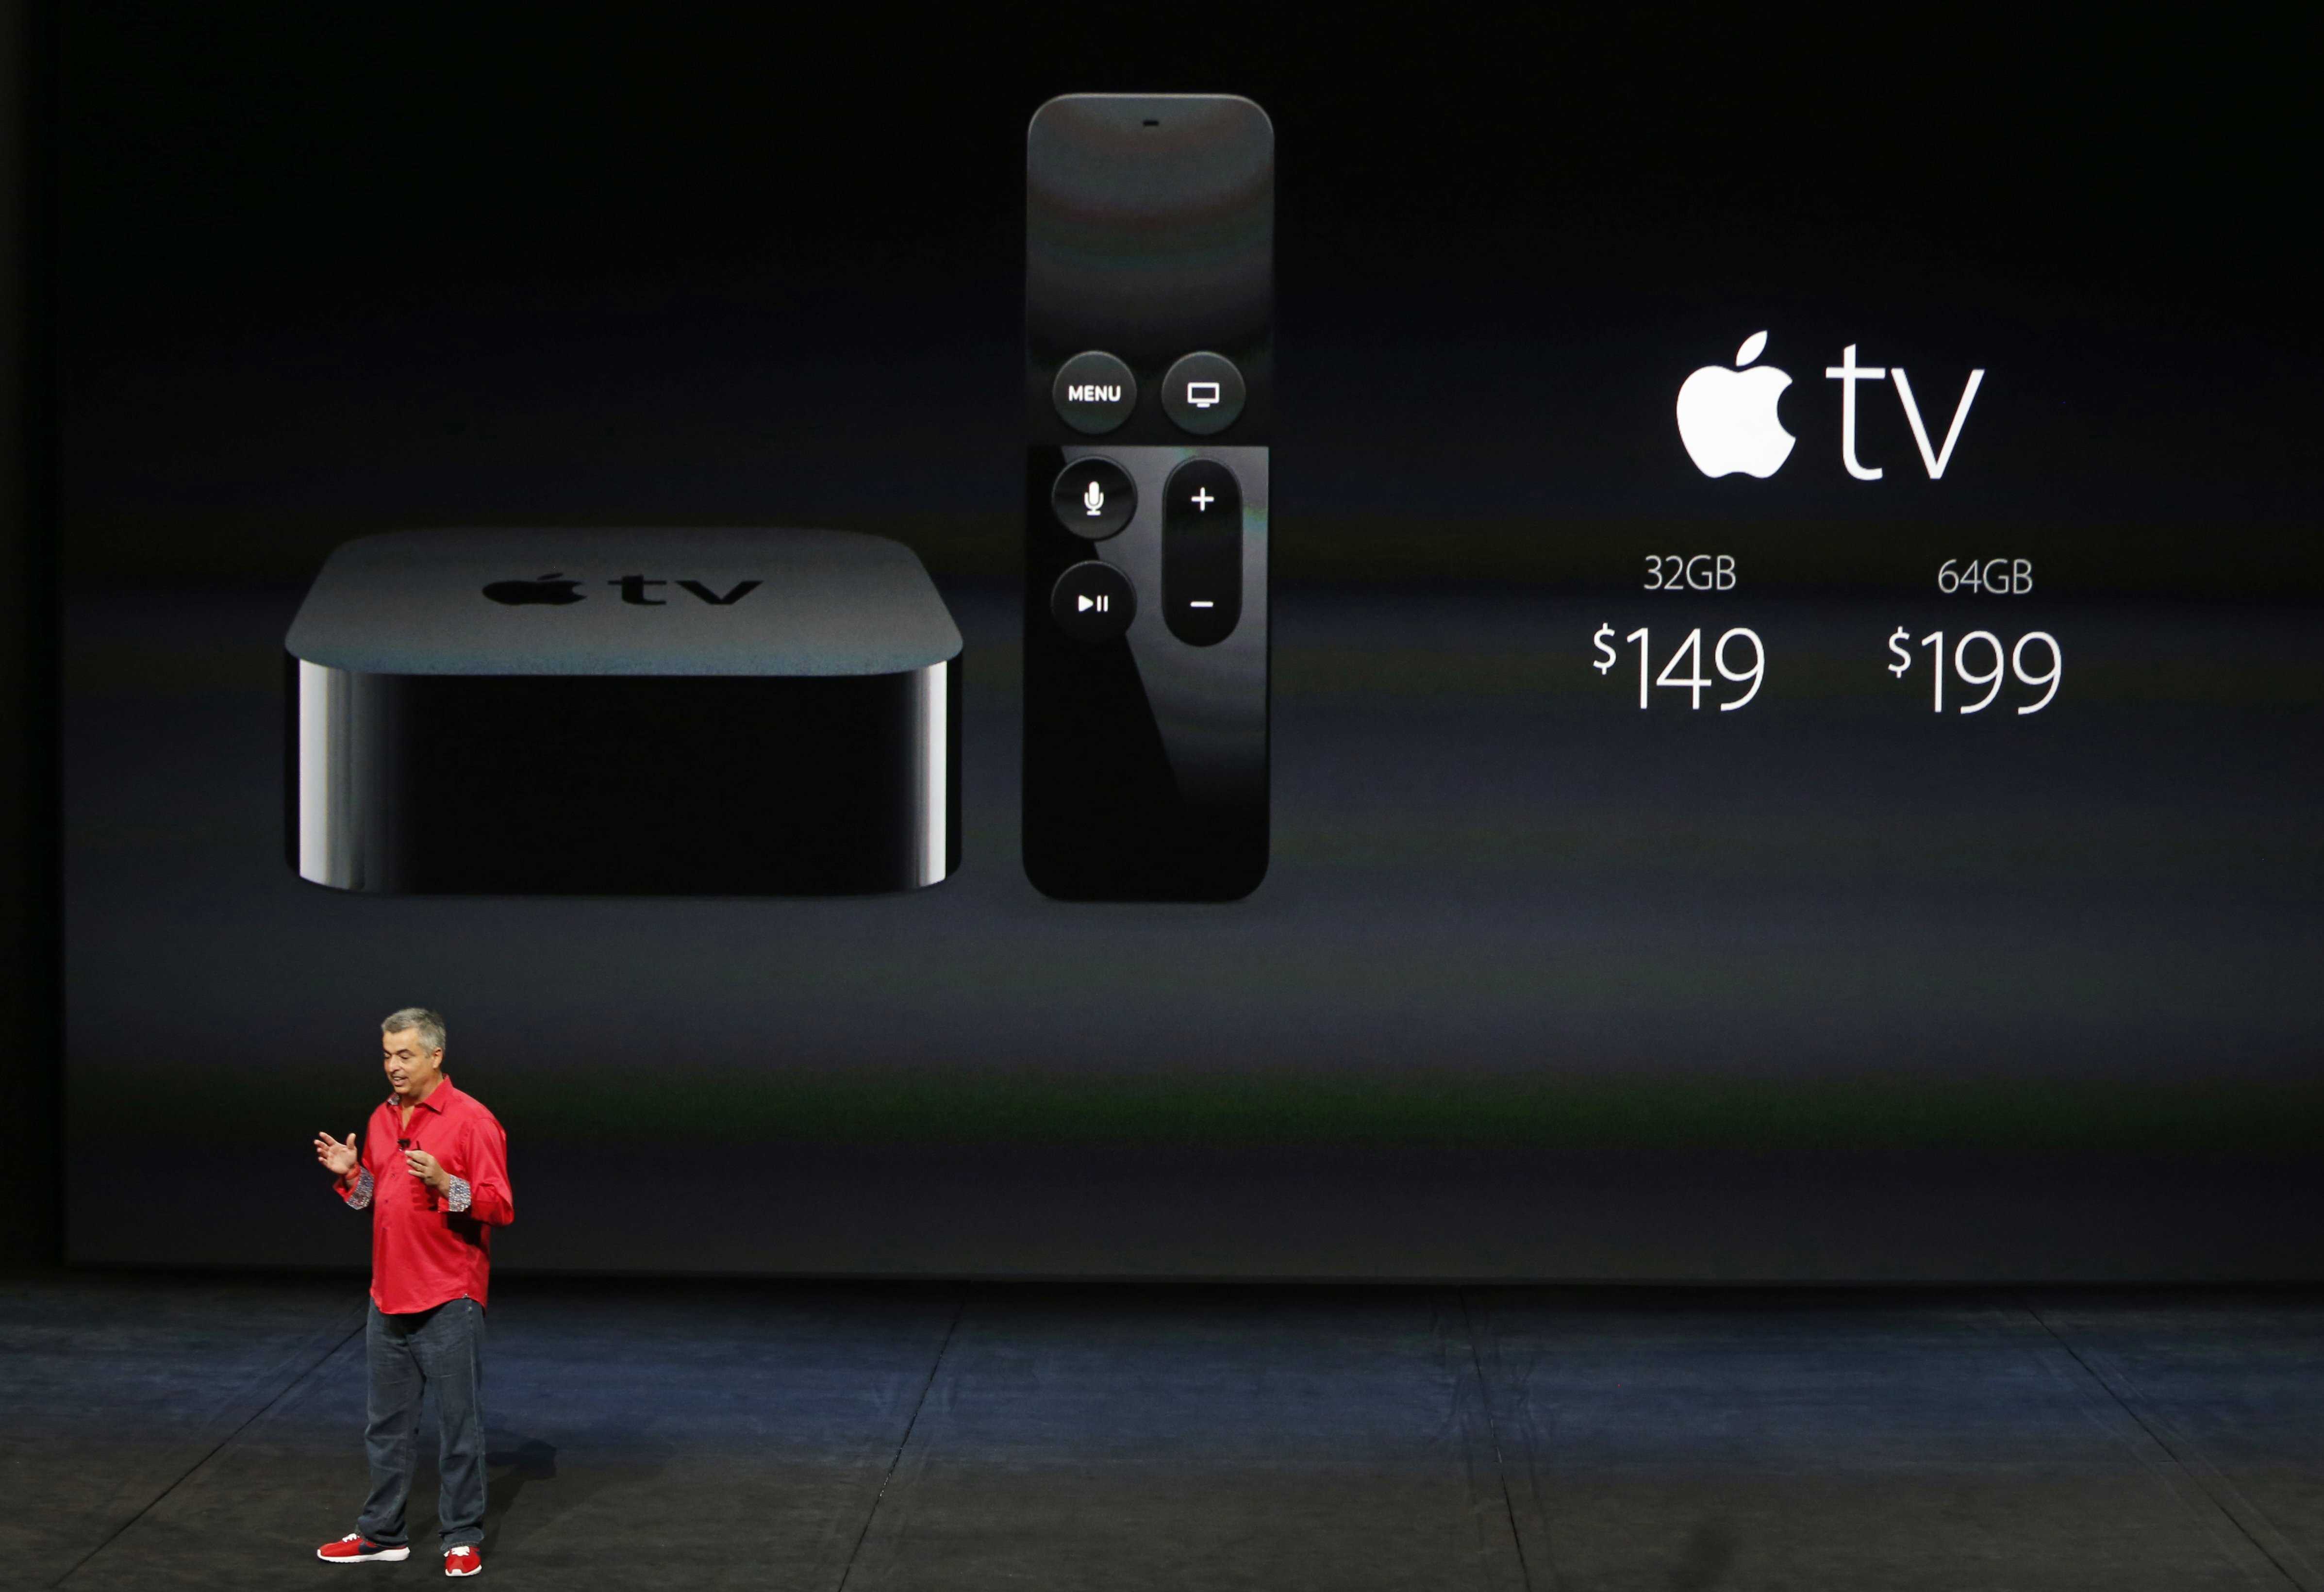 Catch our handson first impressions of the new Apple TV on The